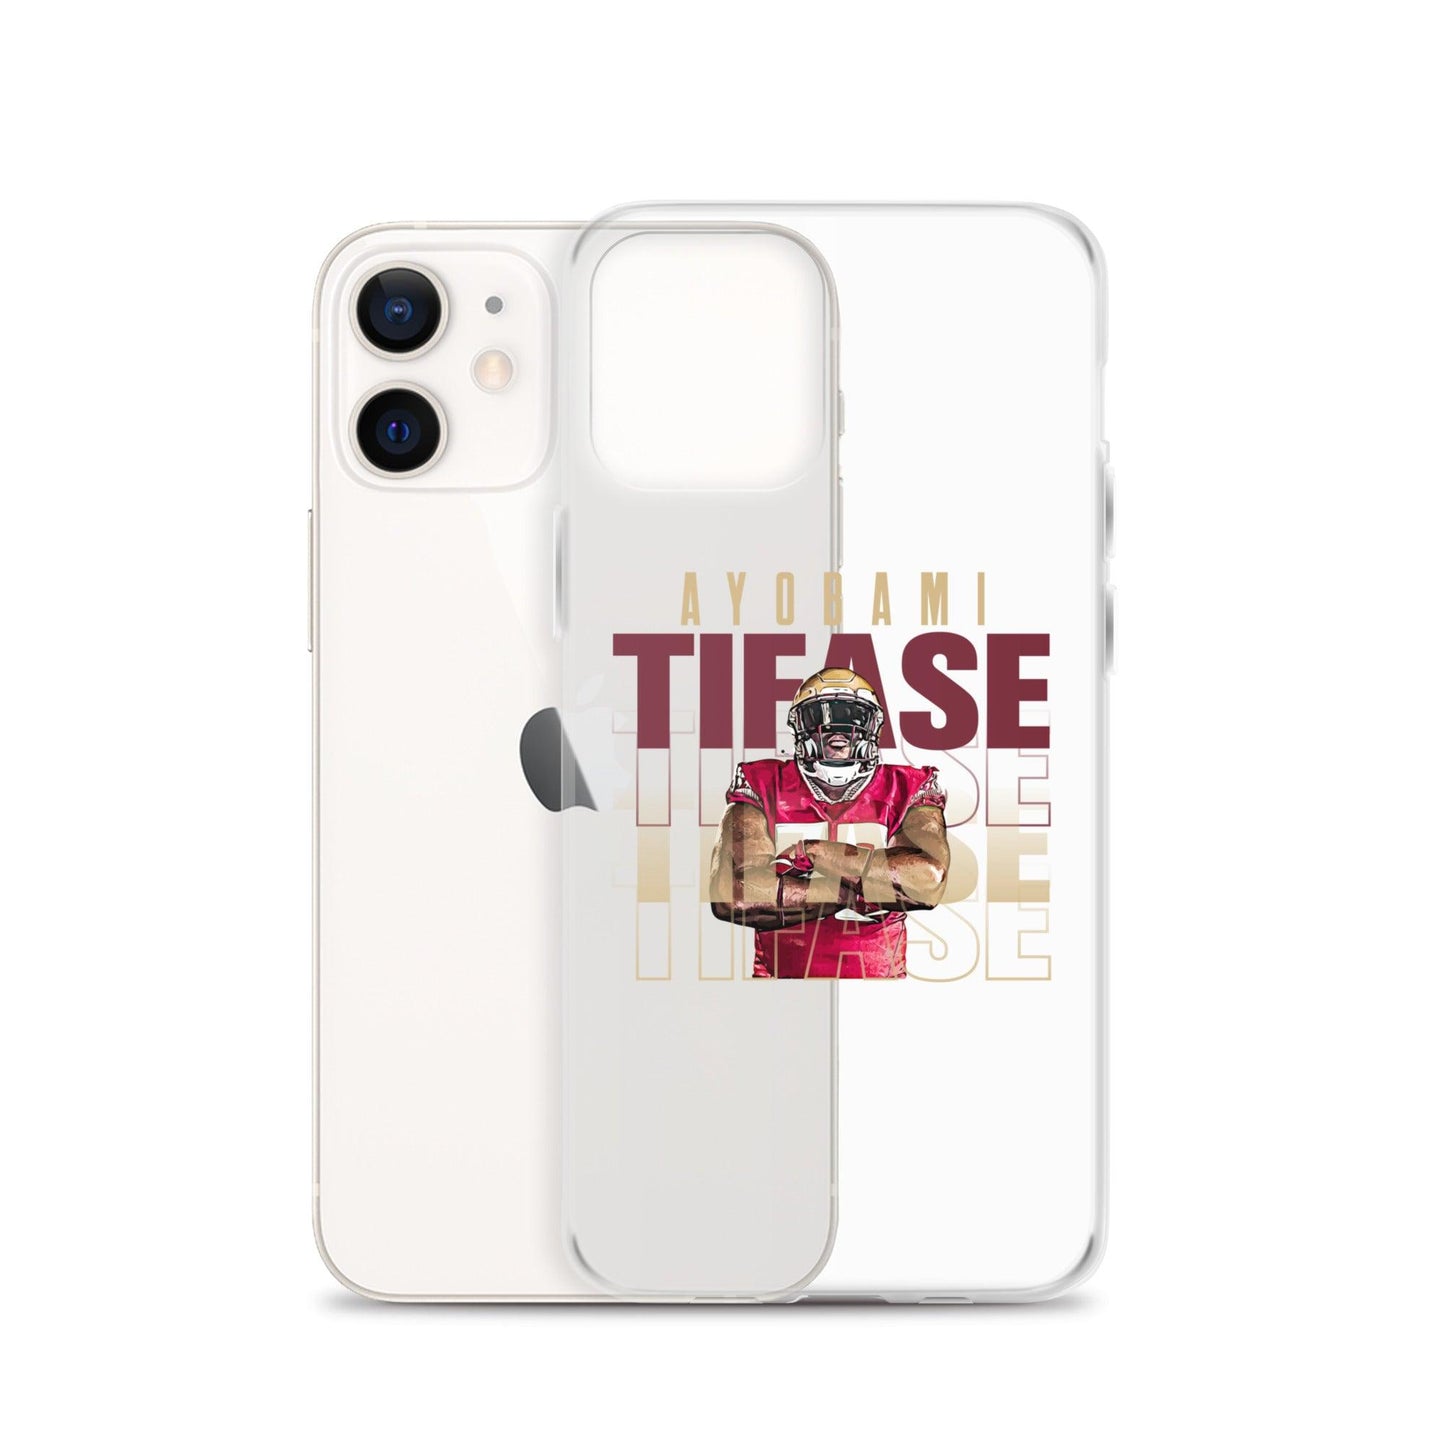 Ayobami Tifase "Repeat" iPhone Case - Fan Arch